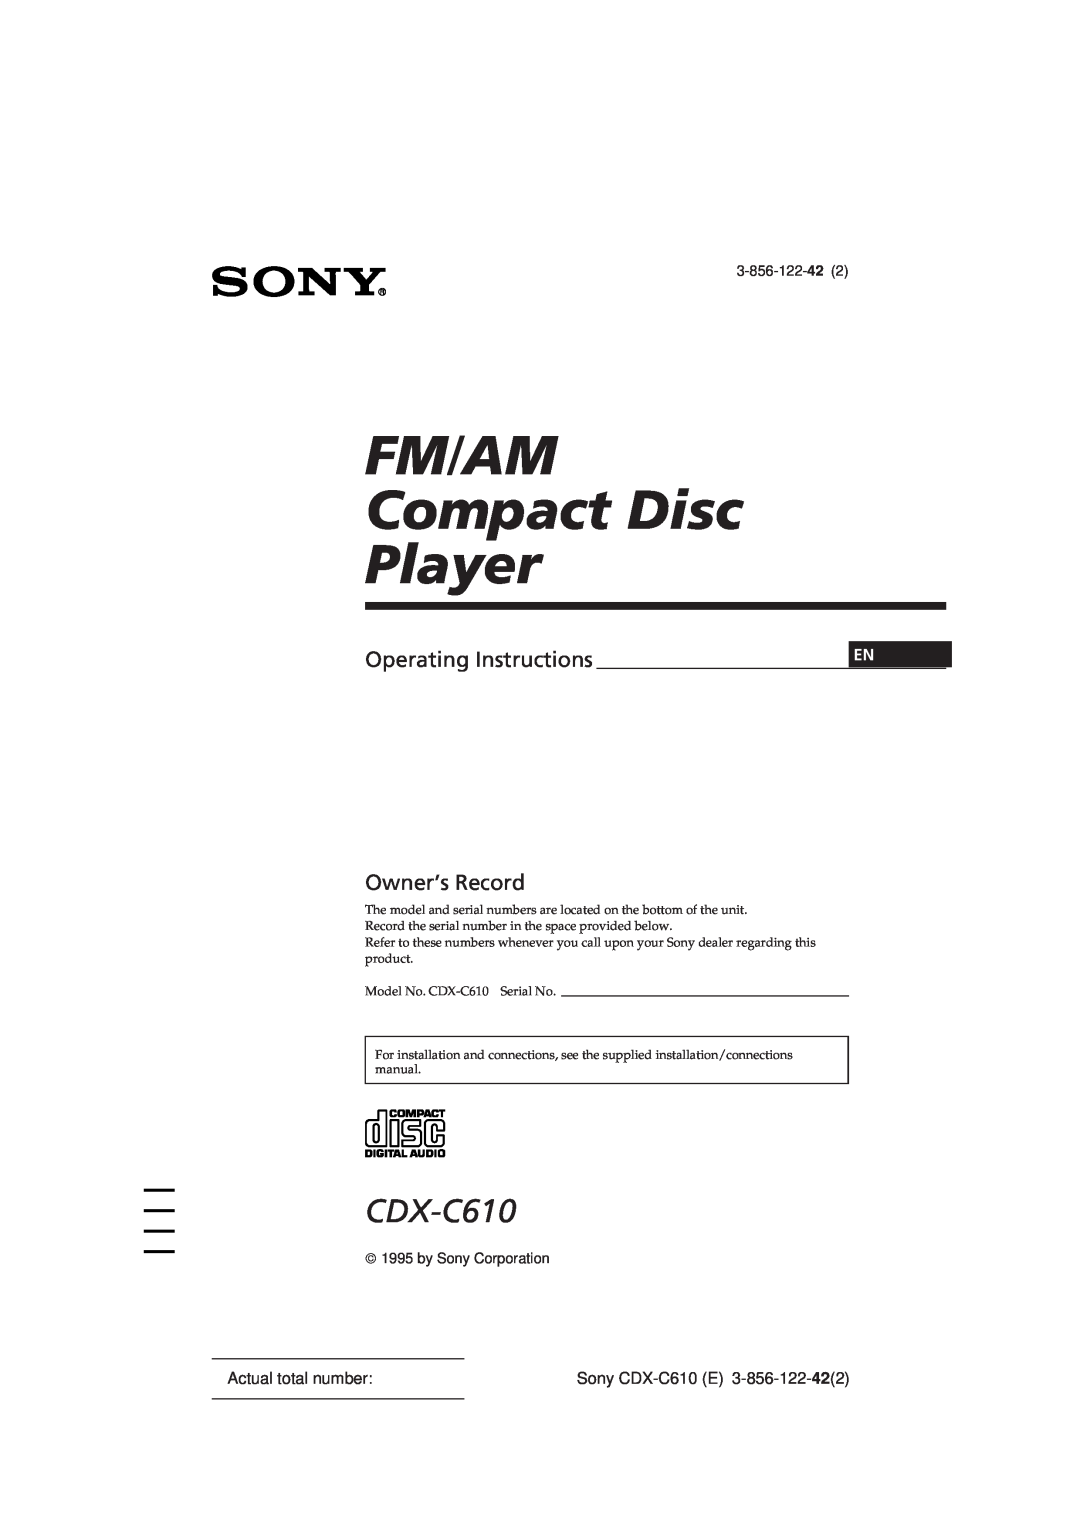 Sony CDX-C610 manual FM/AM Compact Disc Player, Operating Instructions, Owner’s Record, Actual total number, 3-856-122-42 